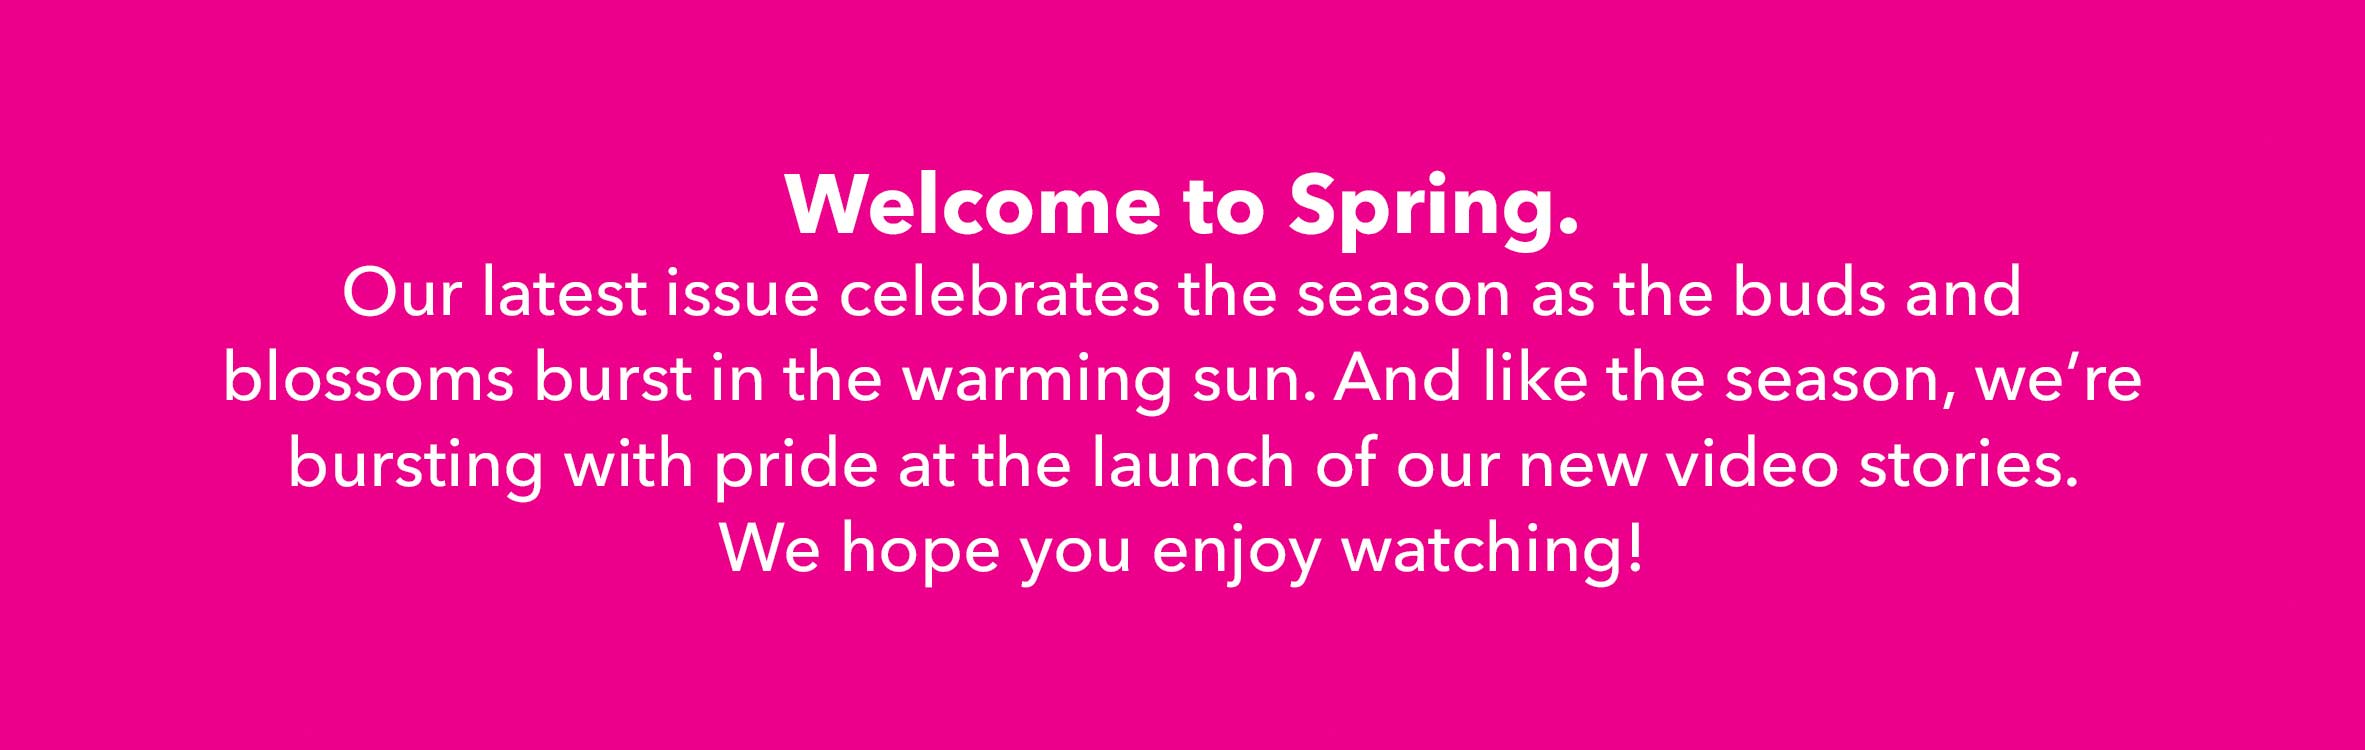 Welcome to Spring - Our latest issue celebrates the season as the buds and blossoms burst in the warming sun. And like the season, we're bursting with pride at the launch of our new video stories. We hope you enjoy watching!